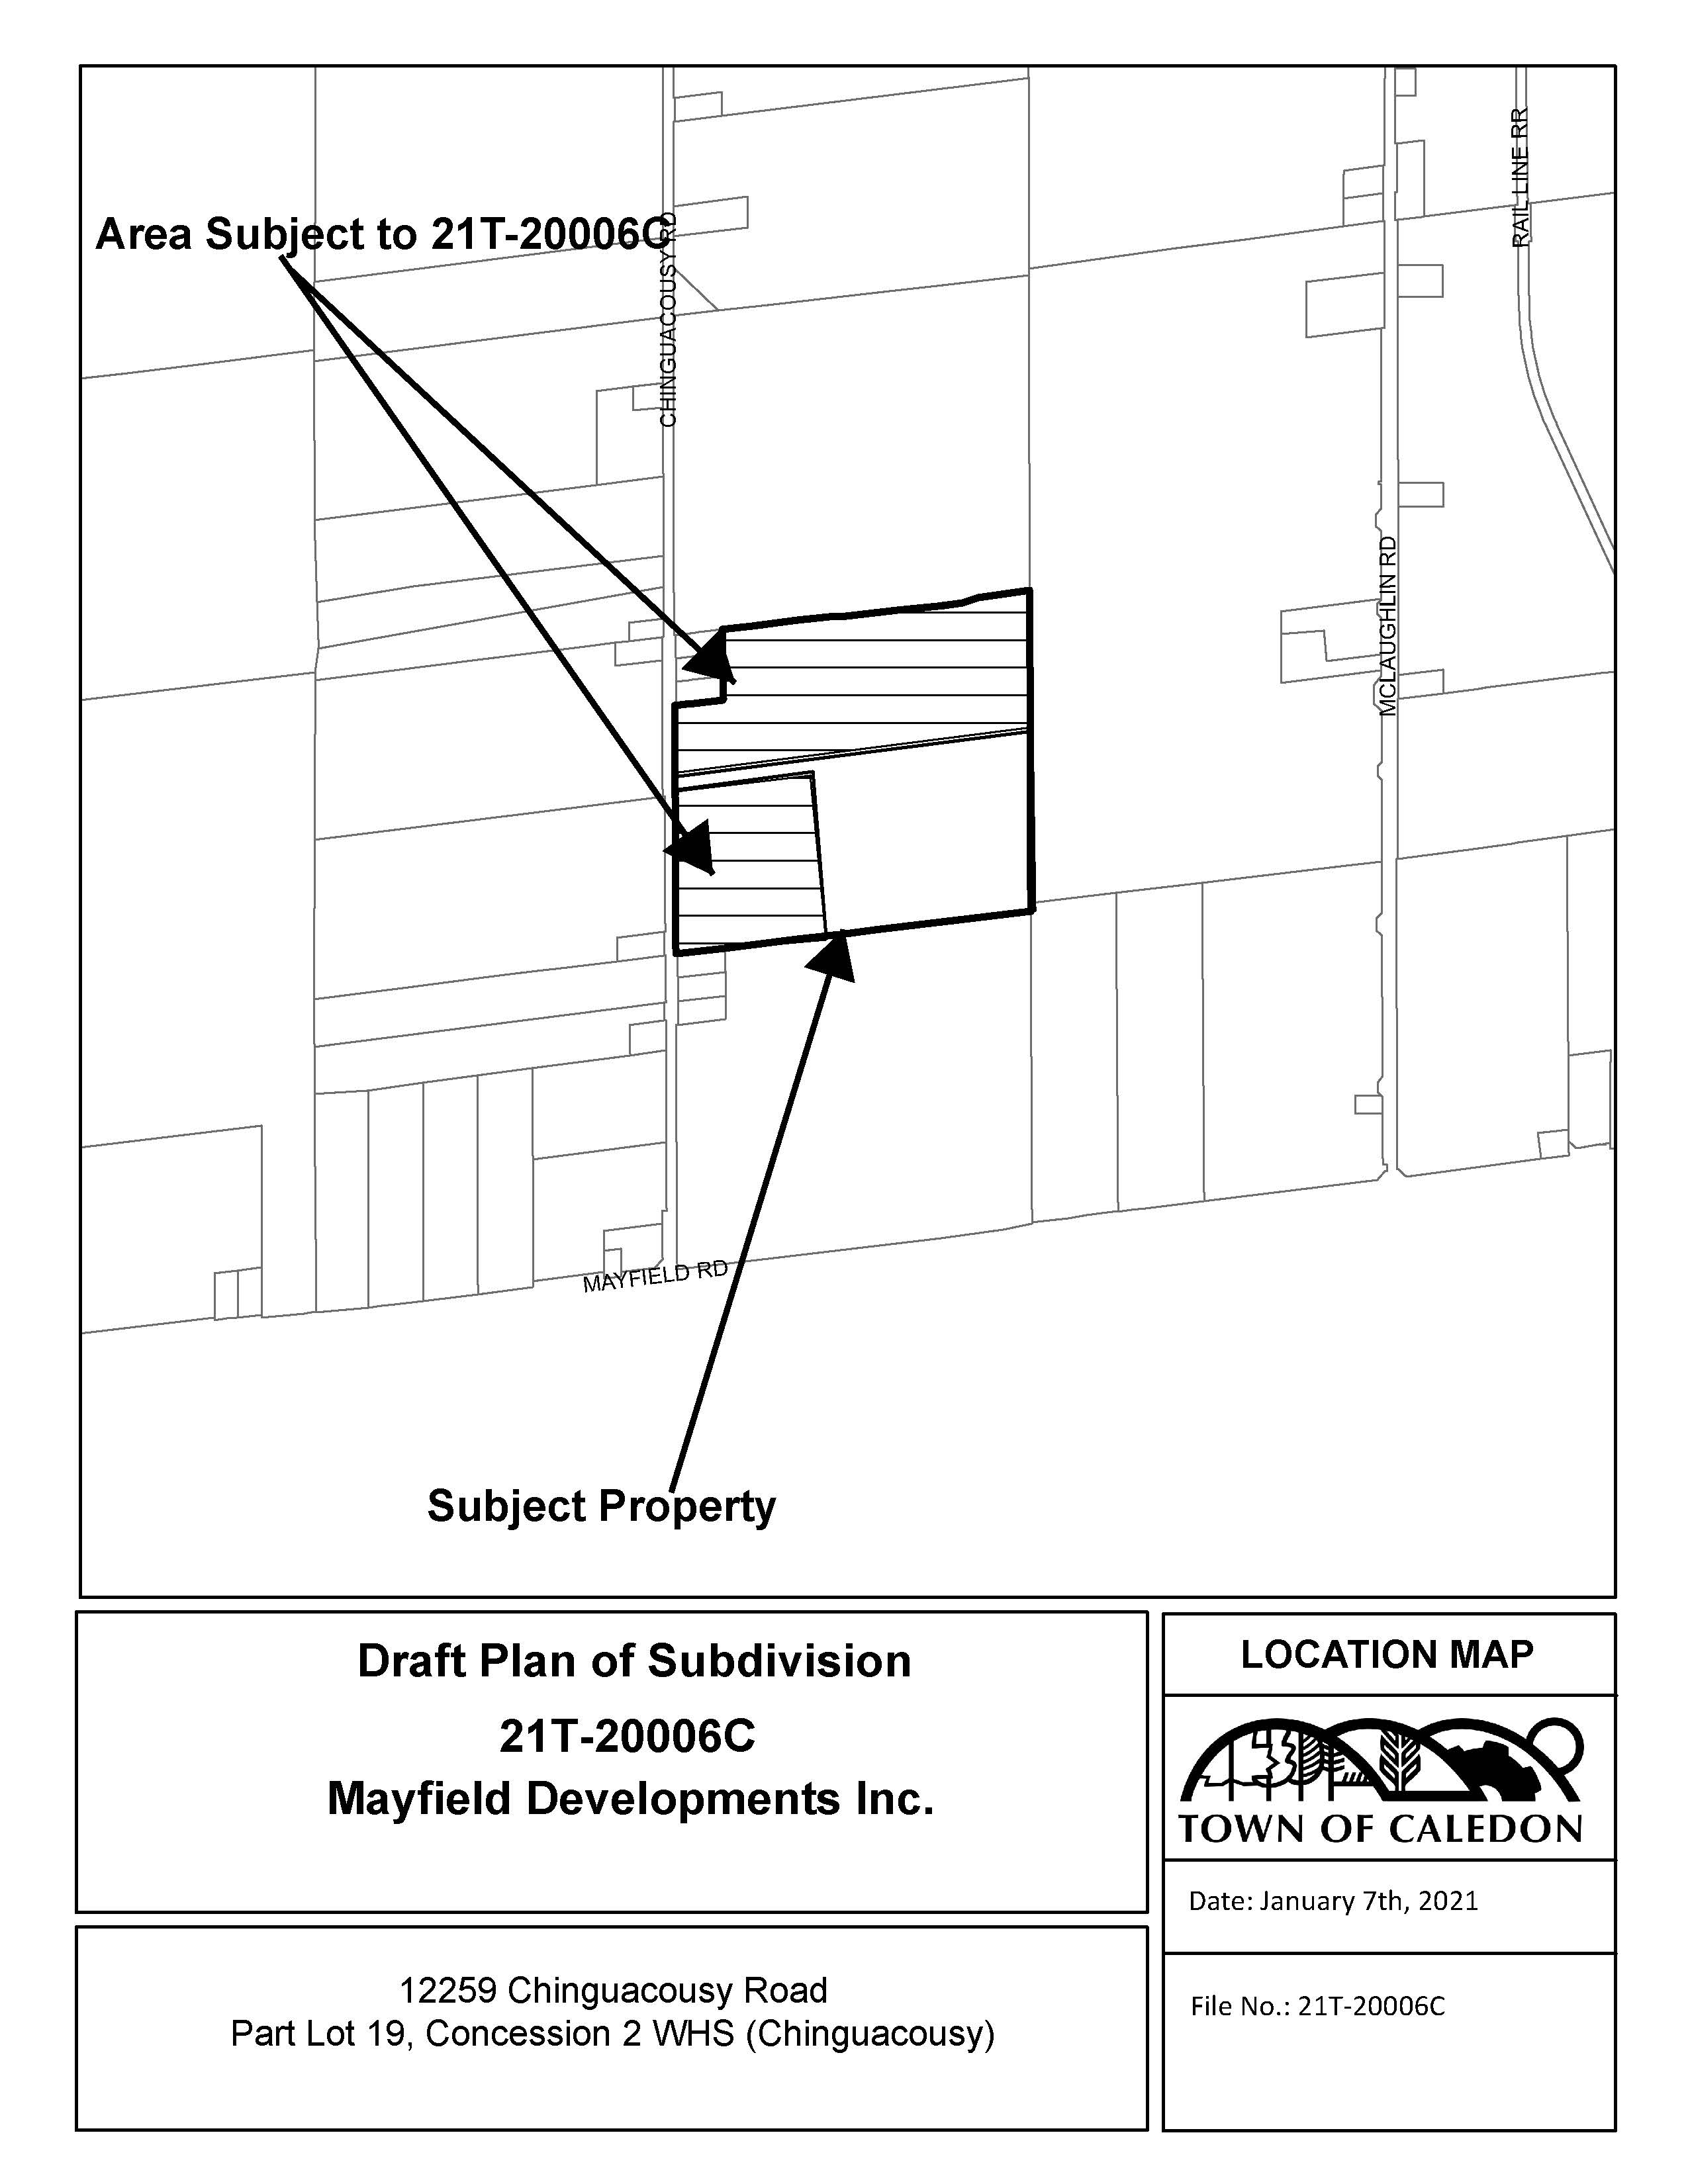 Map of Subject Property at 12259 Chinguacousy Road